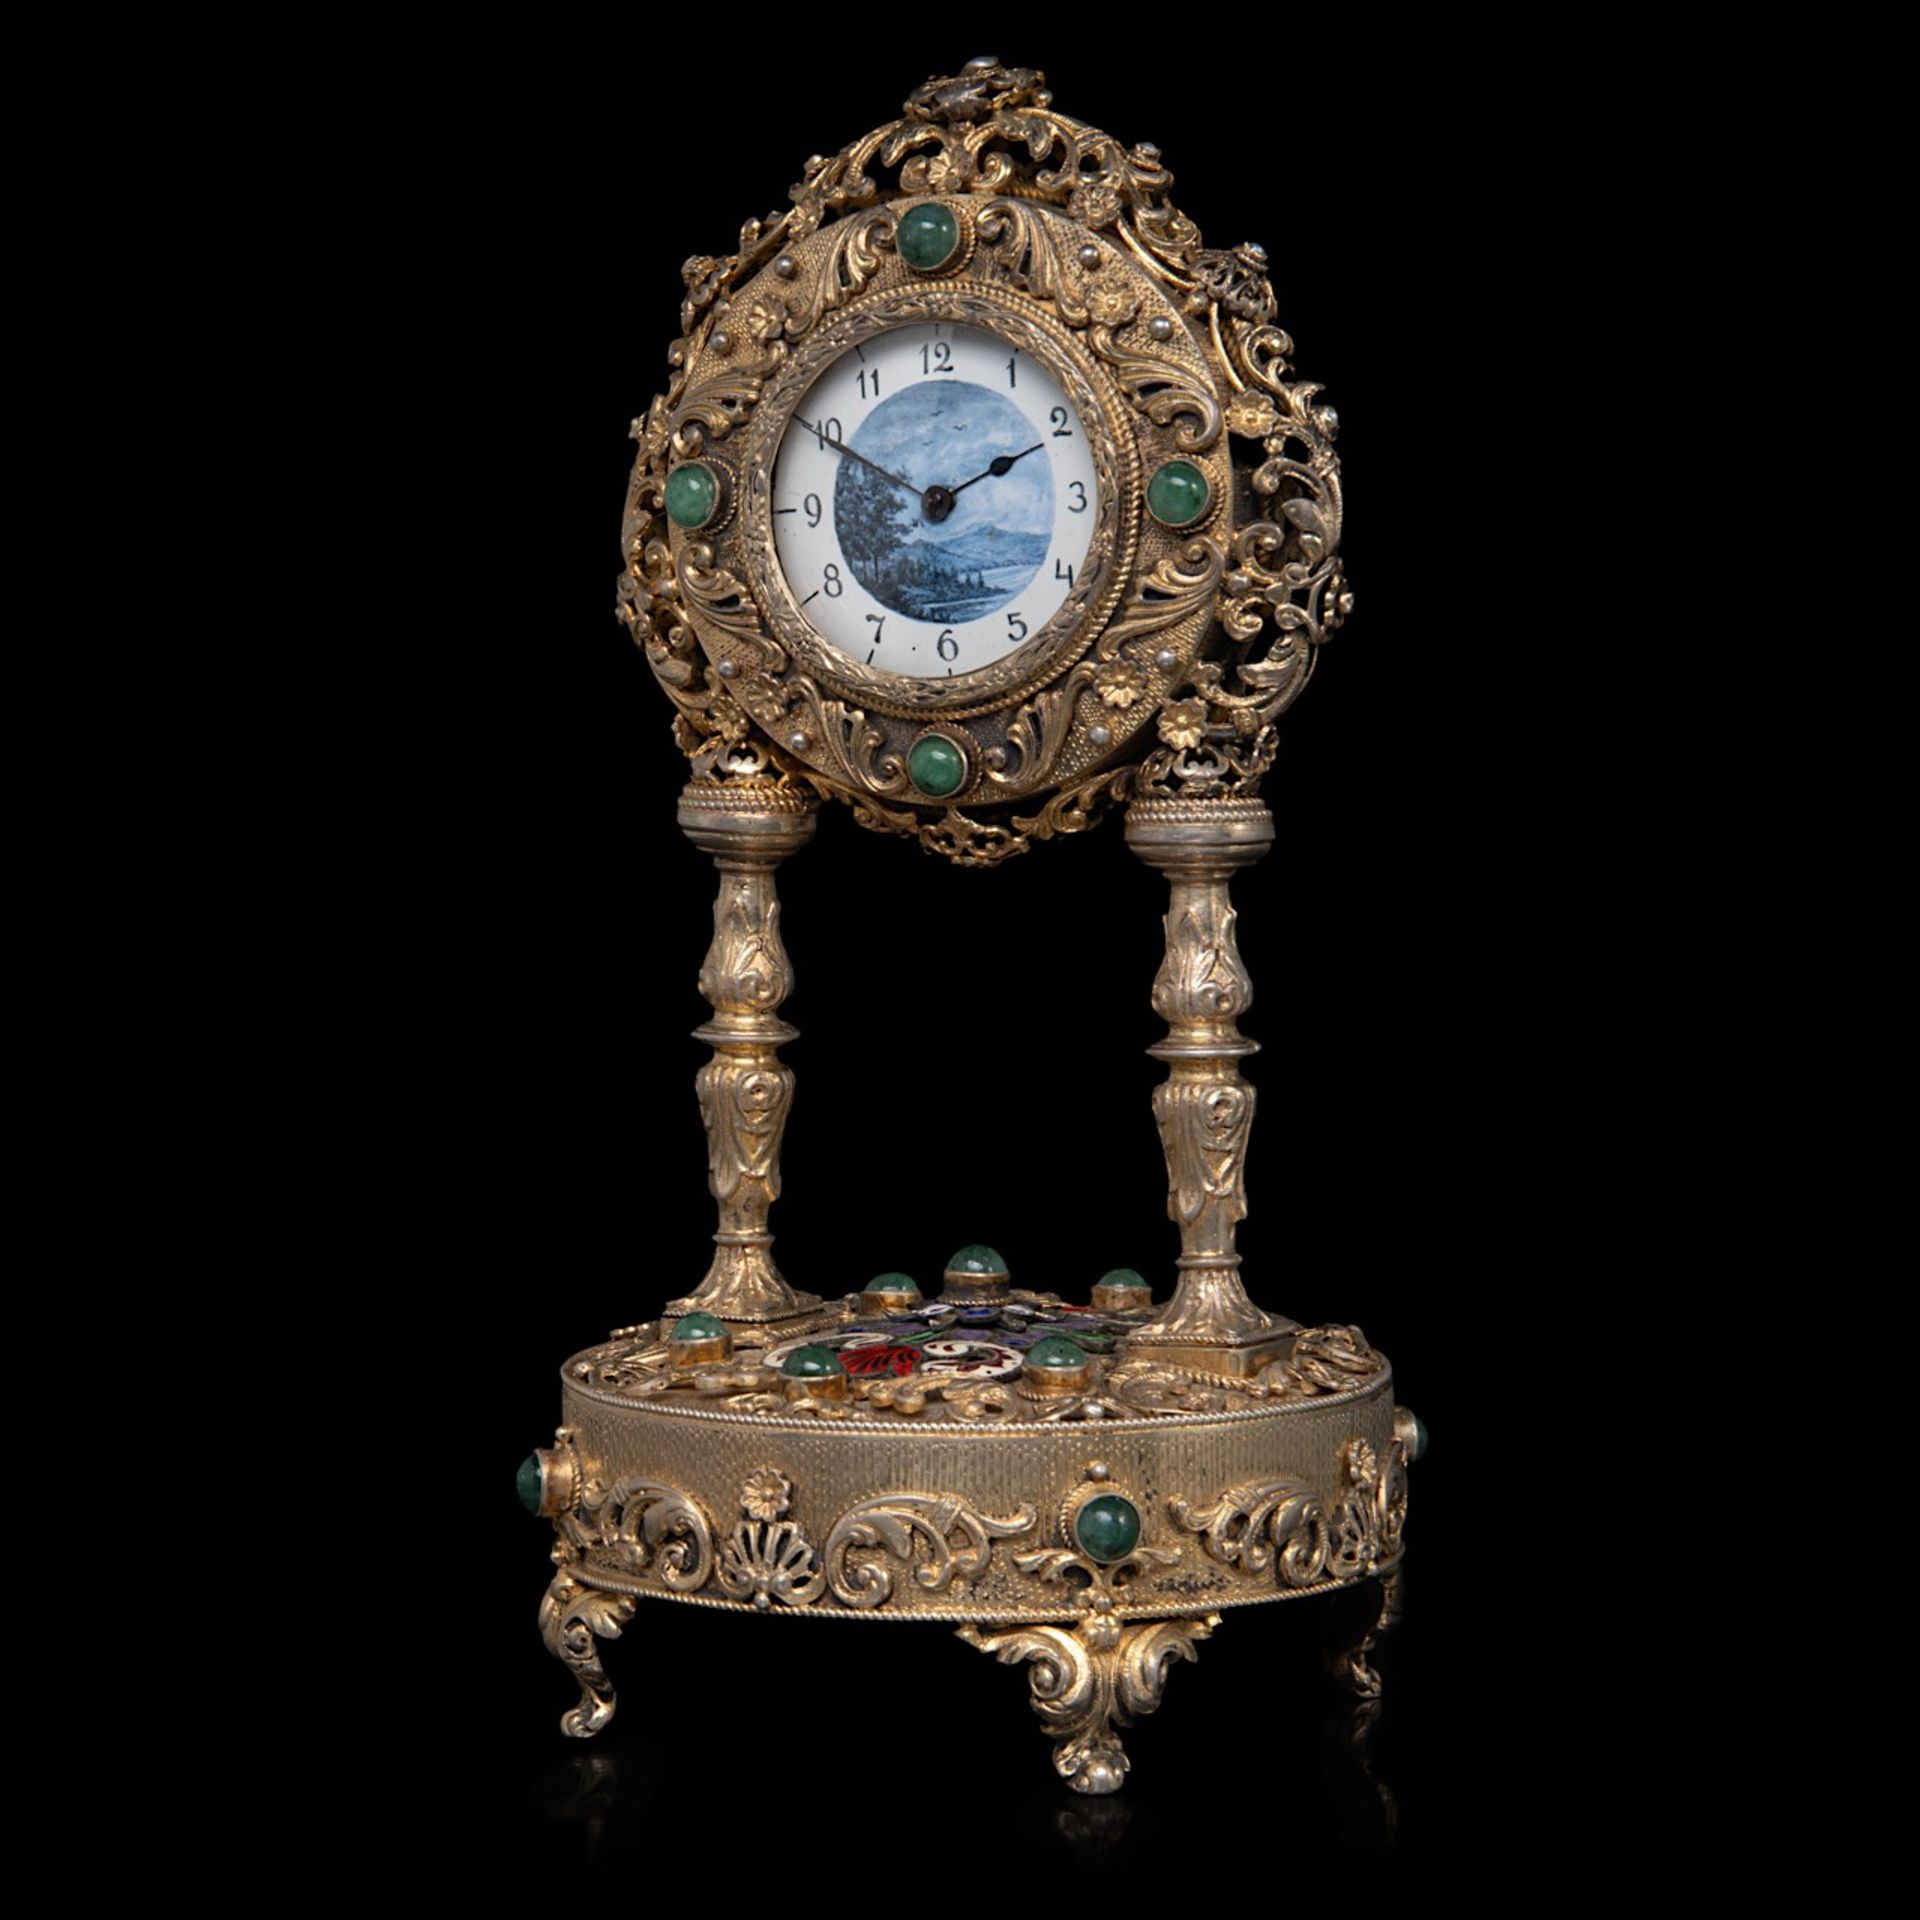 An Austrian gilt-silver and enamel clock with music box, decorated with semi-precious stones and mot - Image 2 of 7